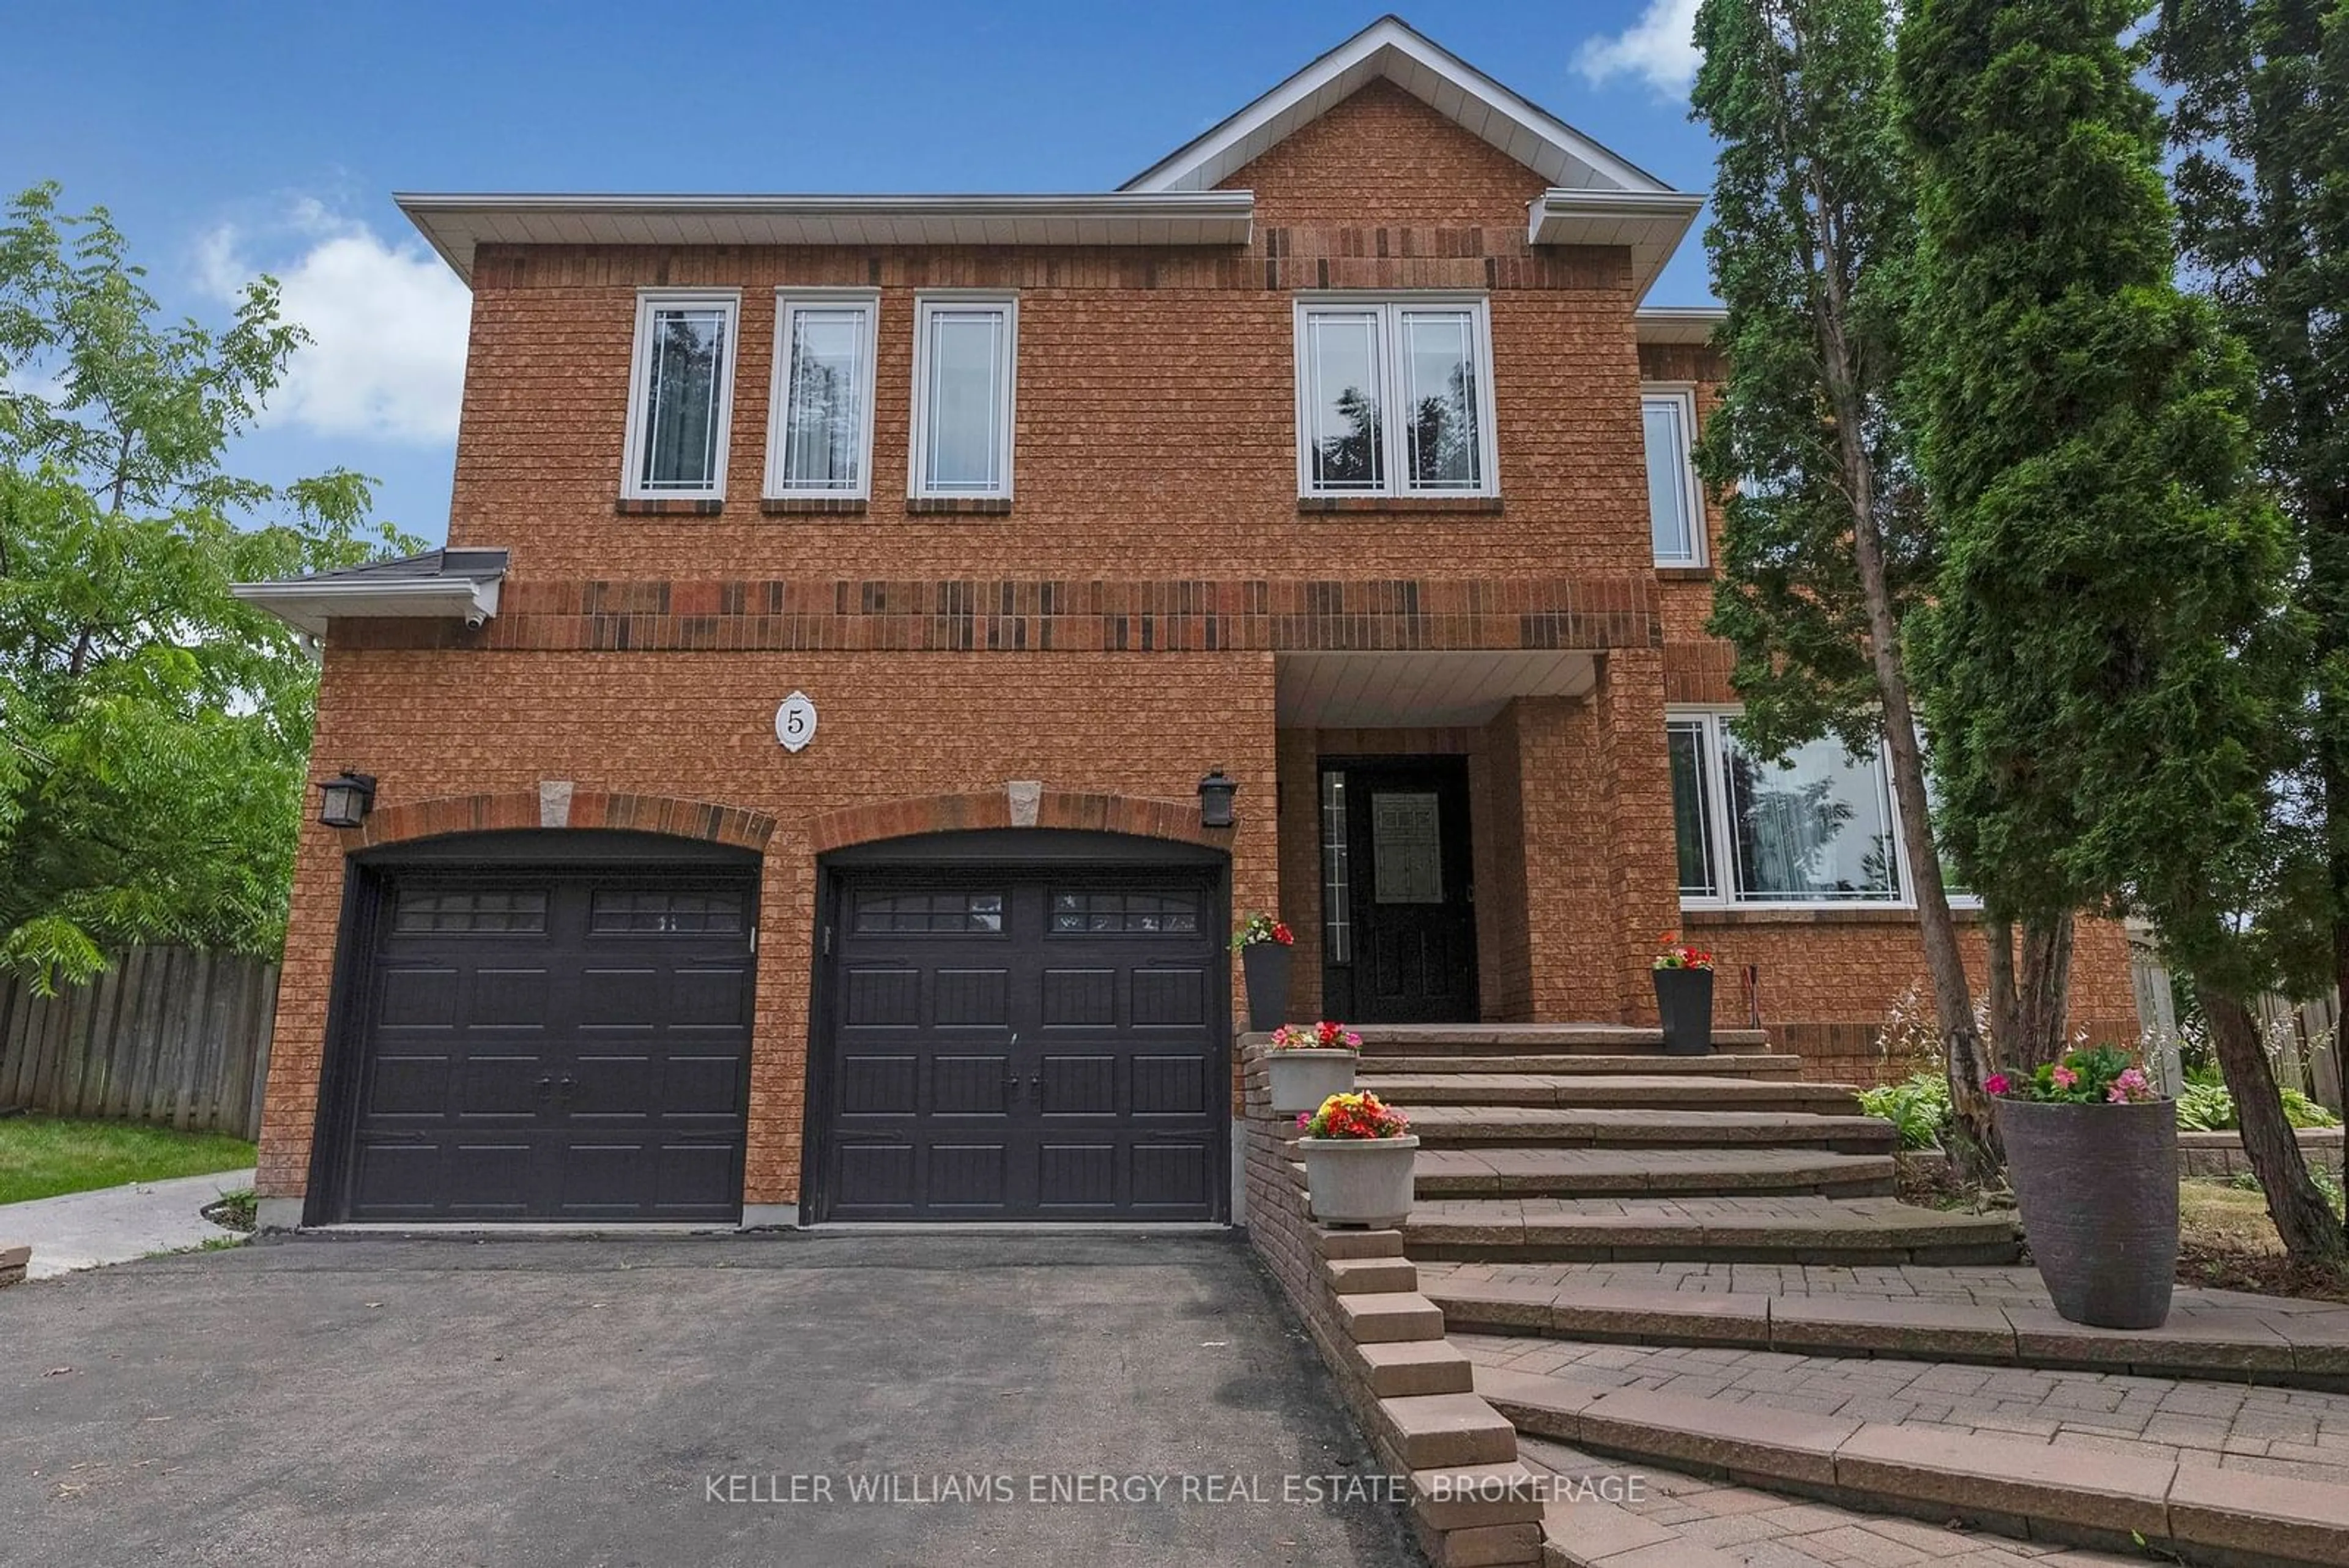 Home with brick exterior material for 5 Nurse Crt, Whitby Ontario L1R 2H8